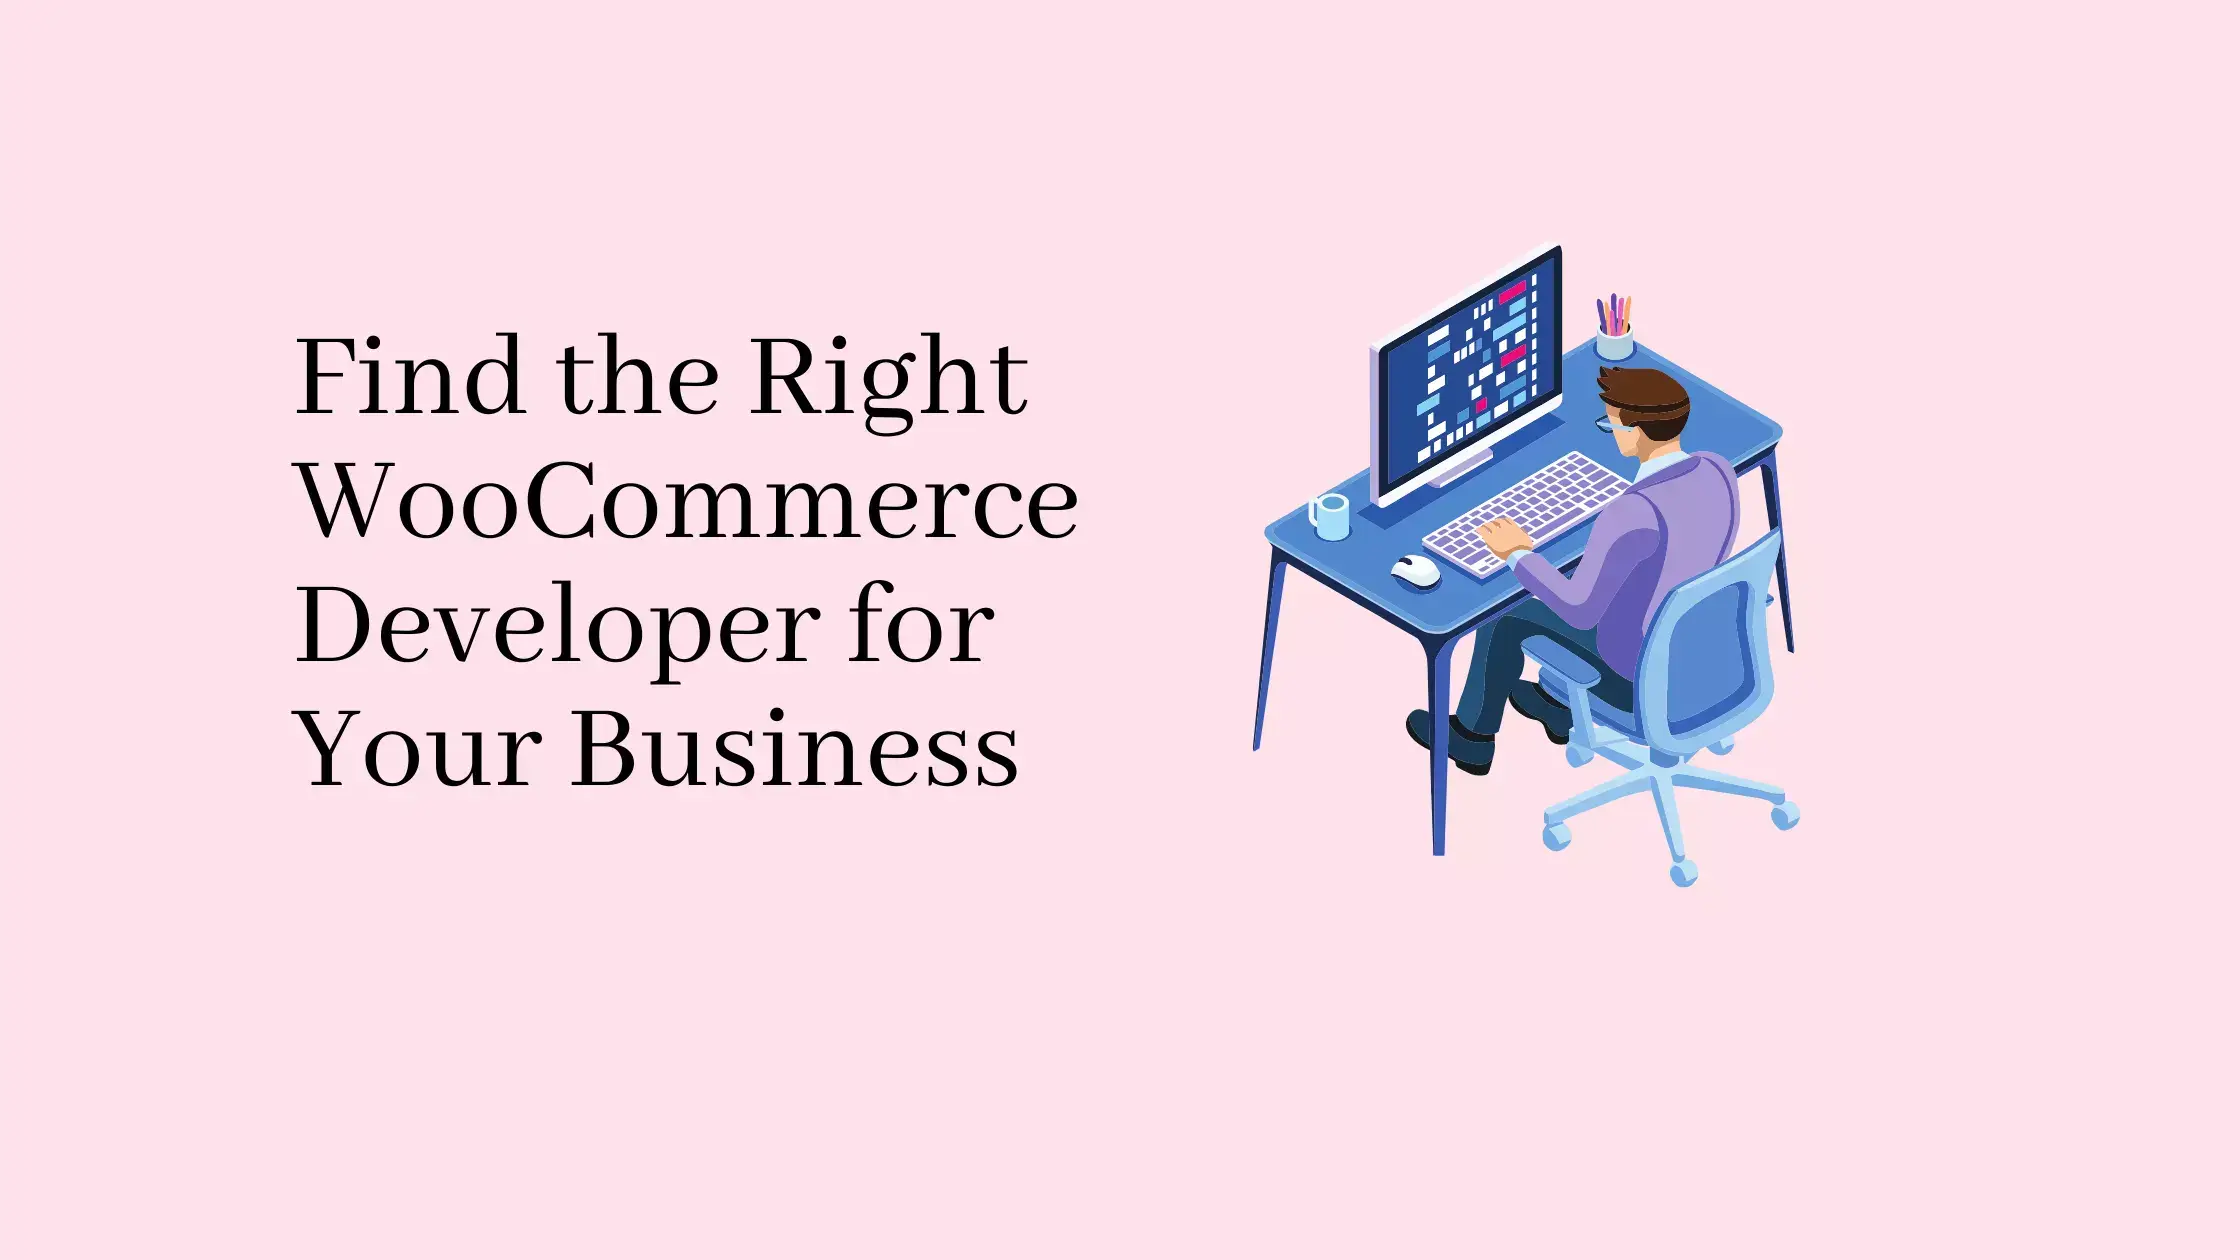 Find-the-Right-WooCommerce-Developer-for-Your-Business